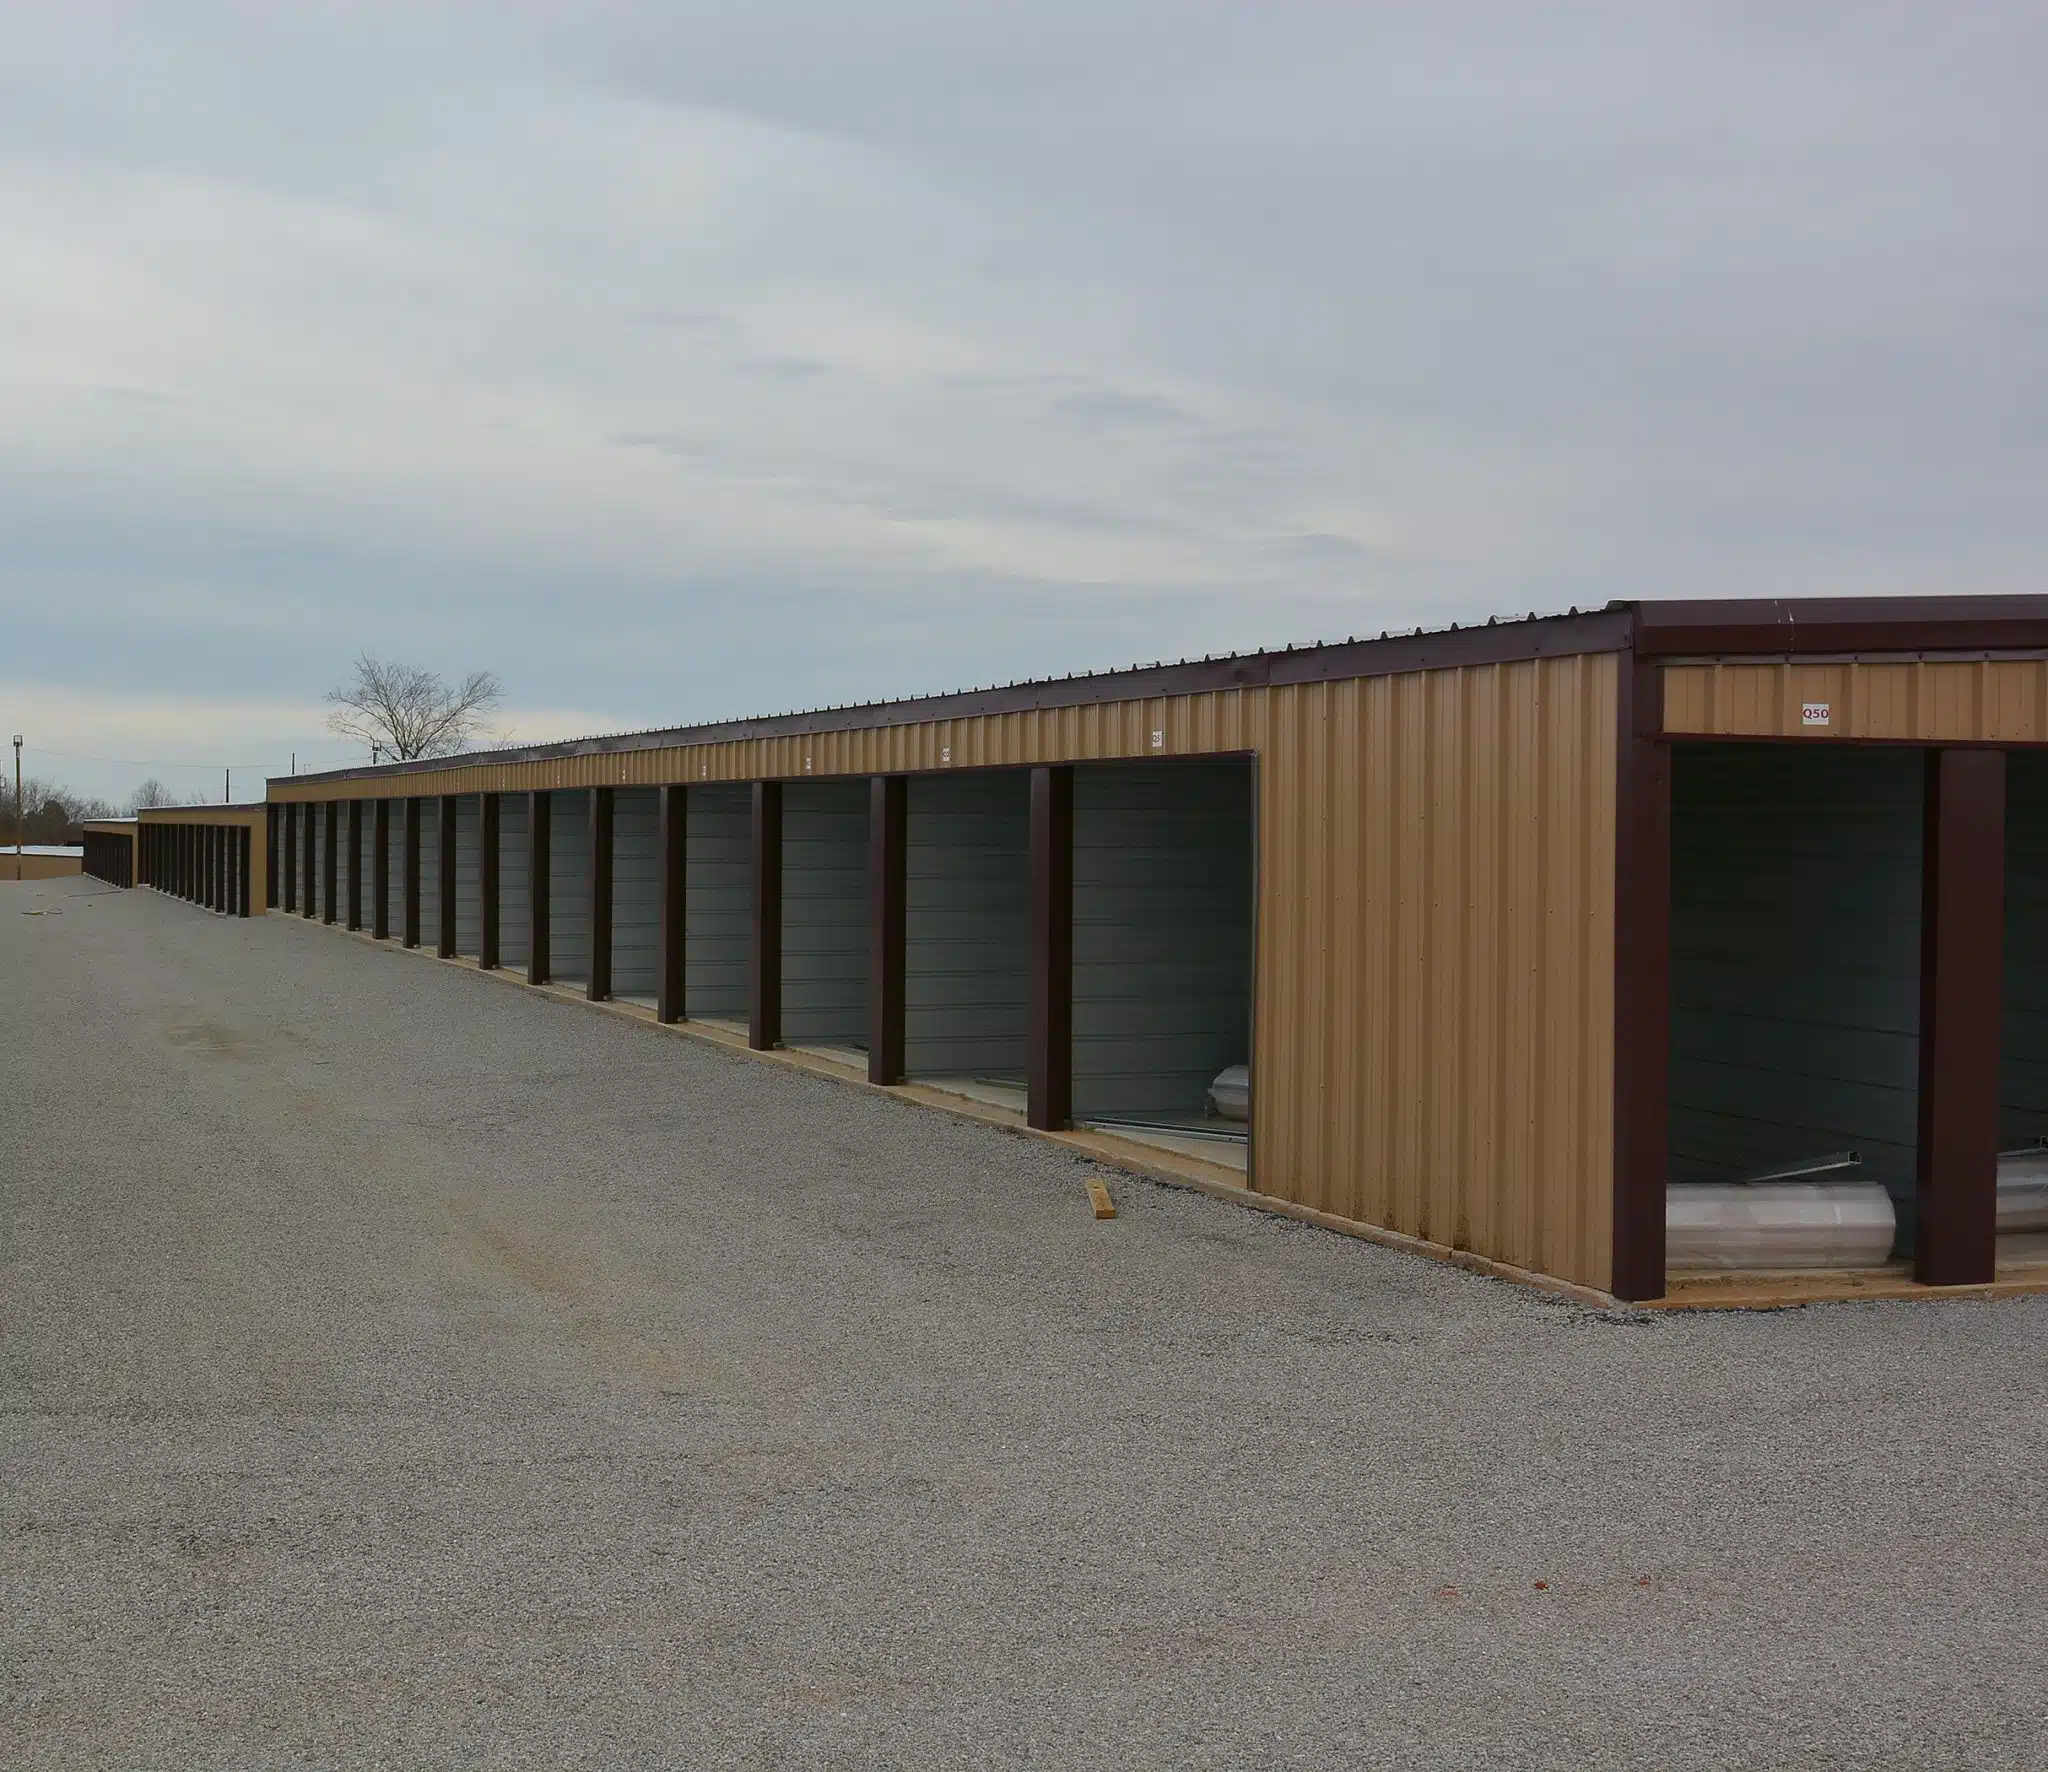 Self-Storage Building Solutions made using commercial metal panels